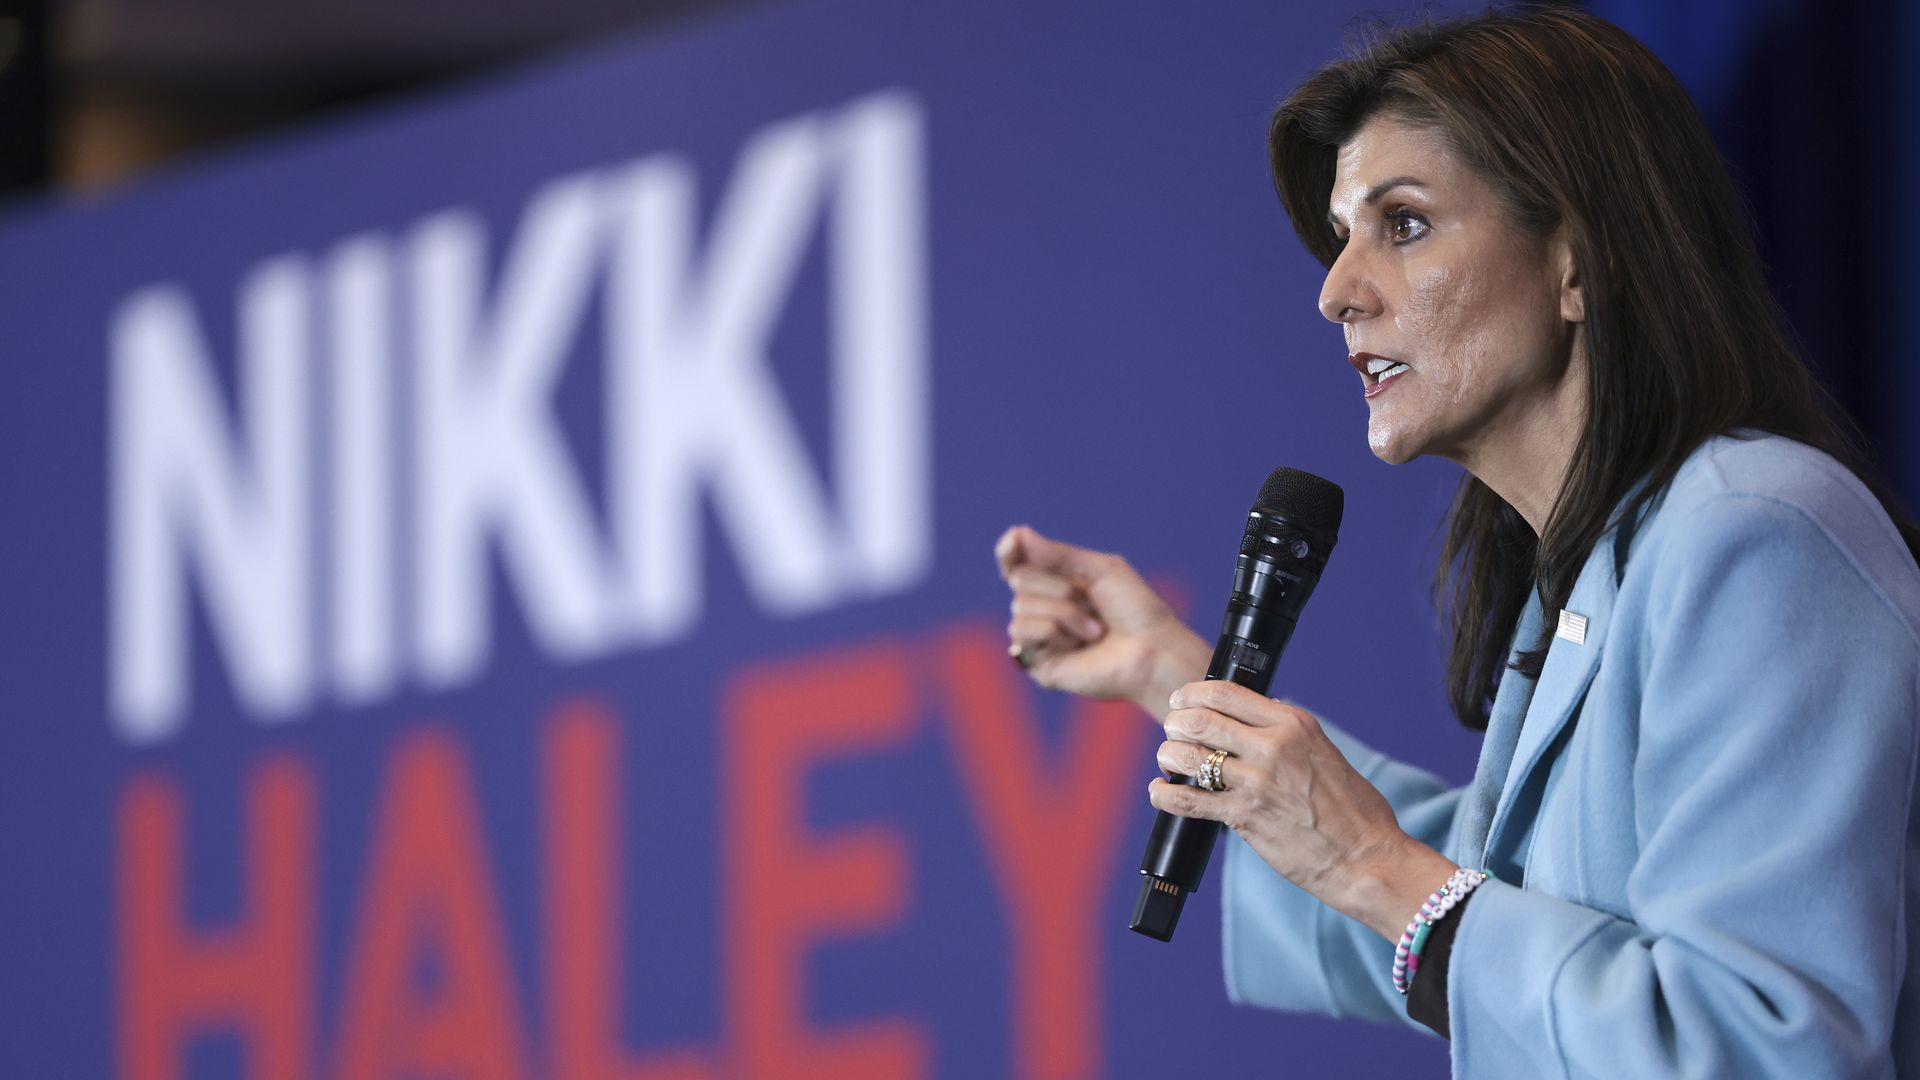 Nikki Haley, wearing a blue jacket, speaks holding a microphone. A large sign in the background says her name in all caps.